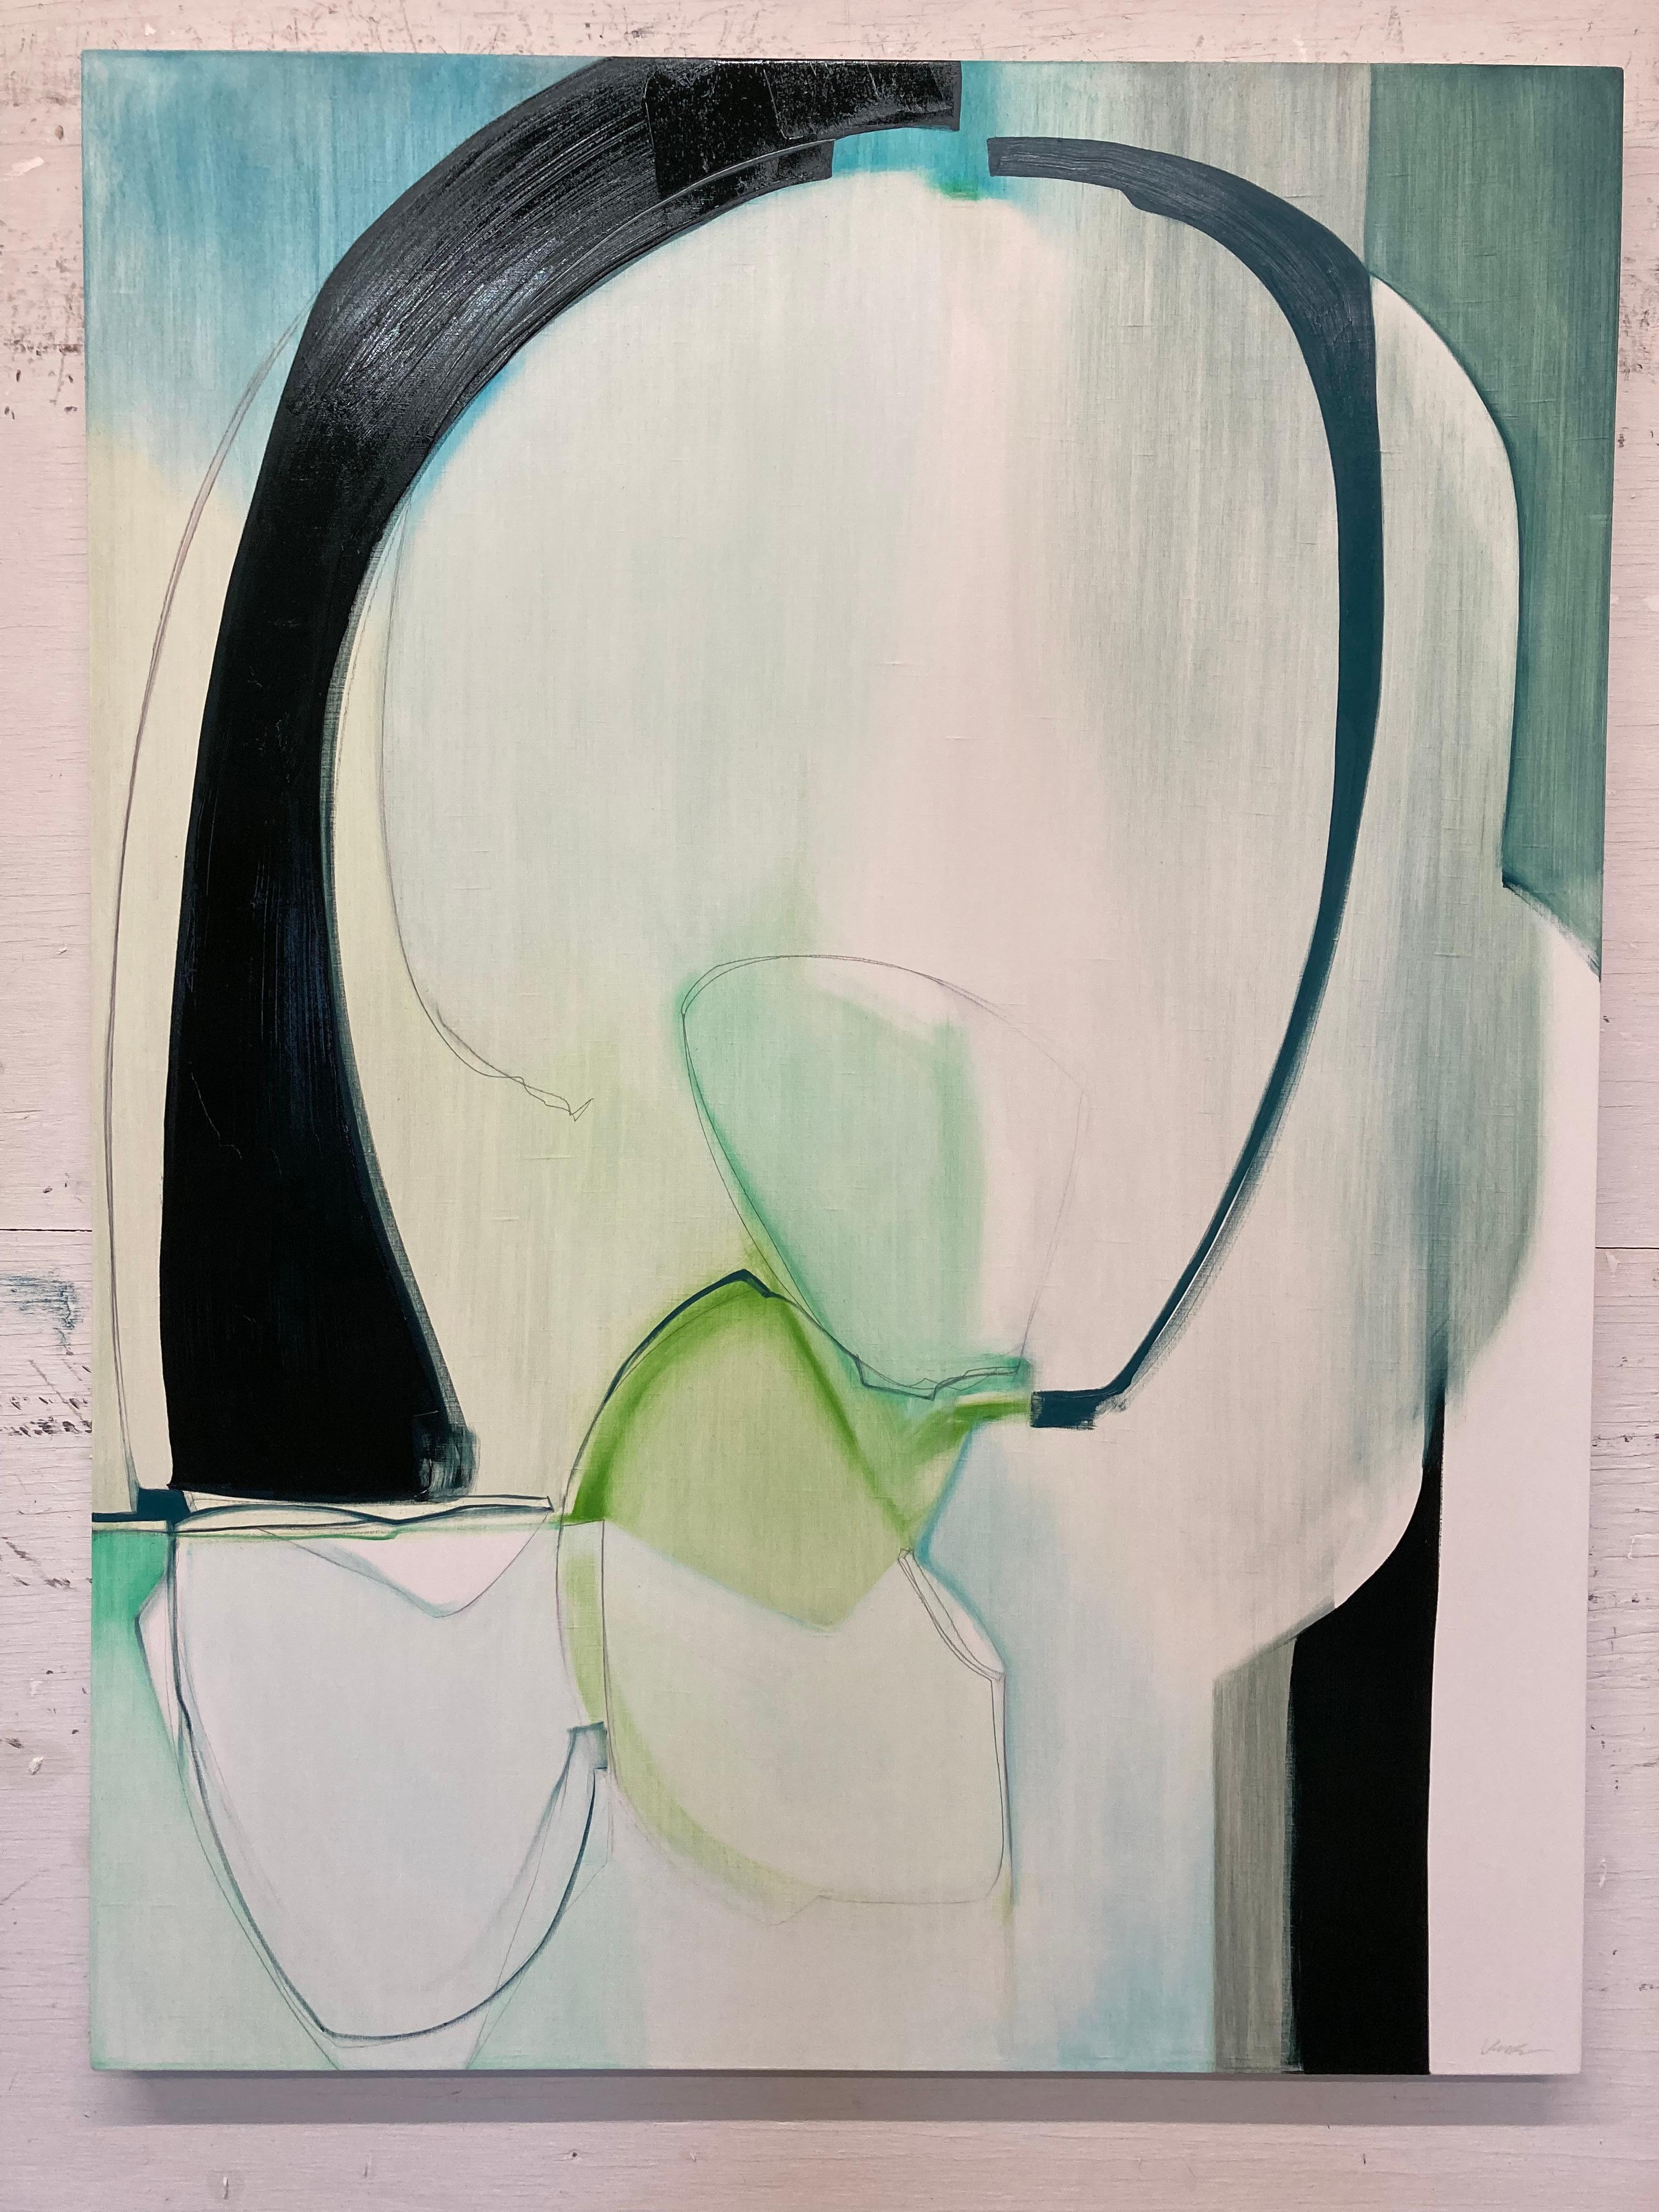 Completing by Rose Umerlik is an abstract painting, Oil and Graphite on wood panel, 49 x 36.  This is part of a new 2022 series.  According to Umerlik, 